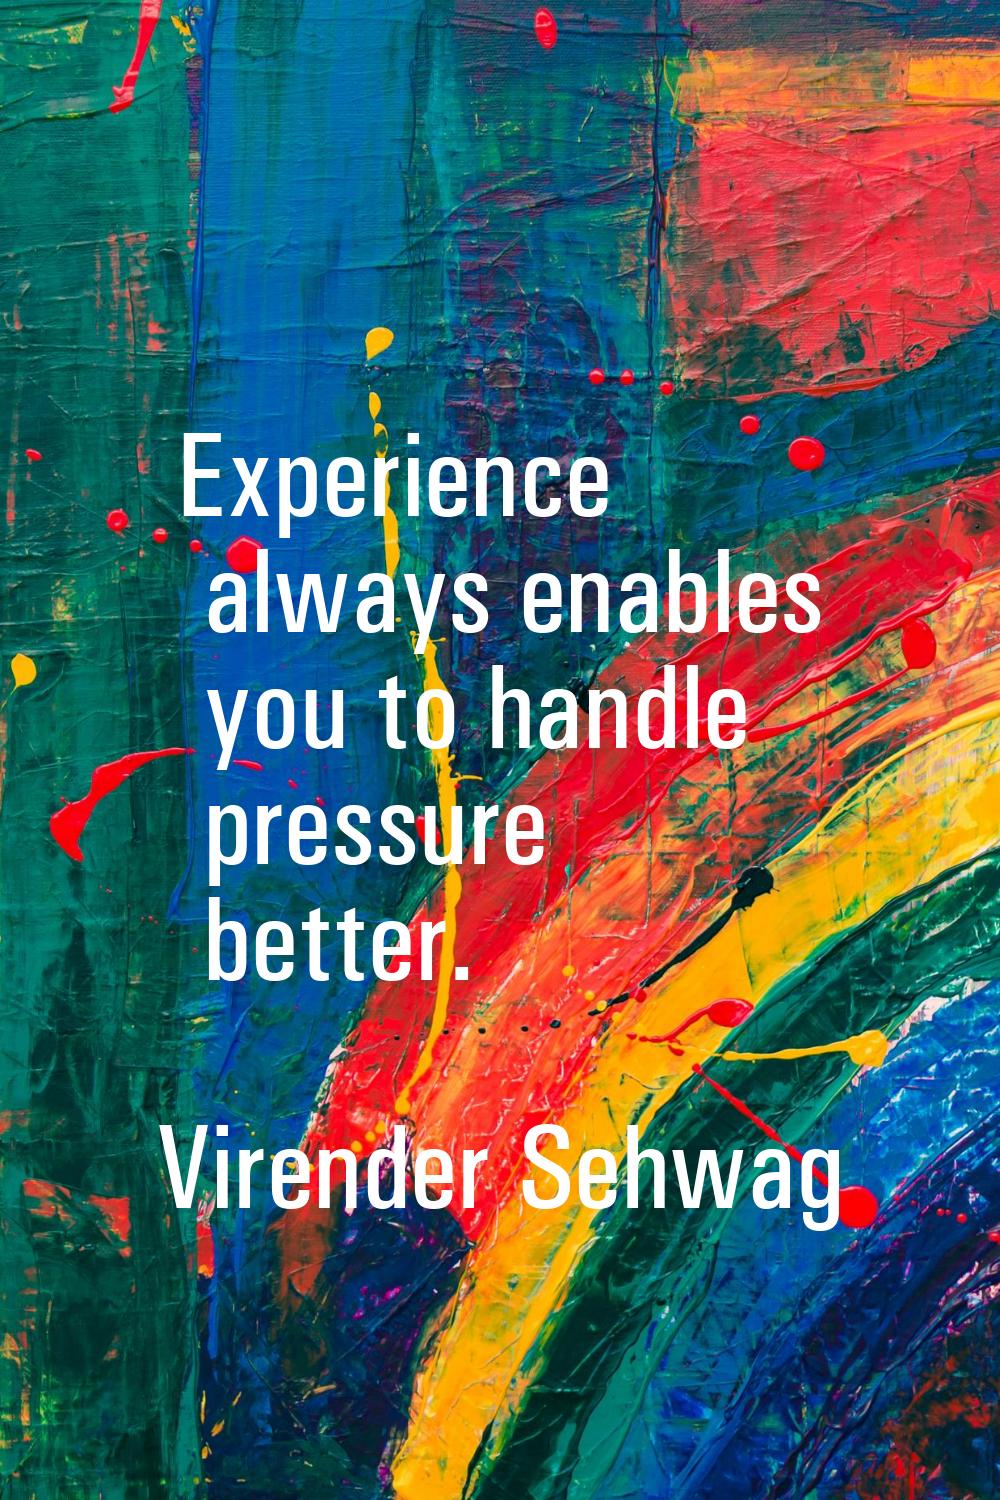 Experience always enables you to handle pressure better.